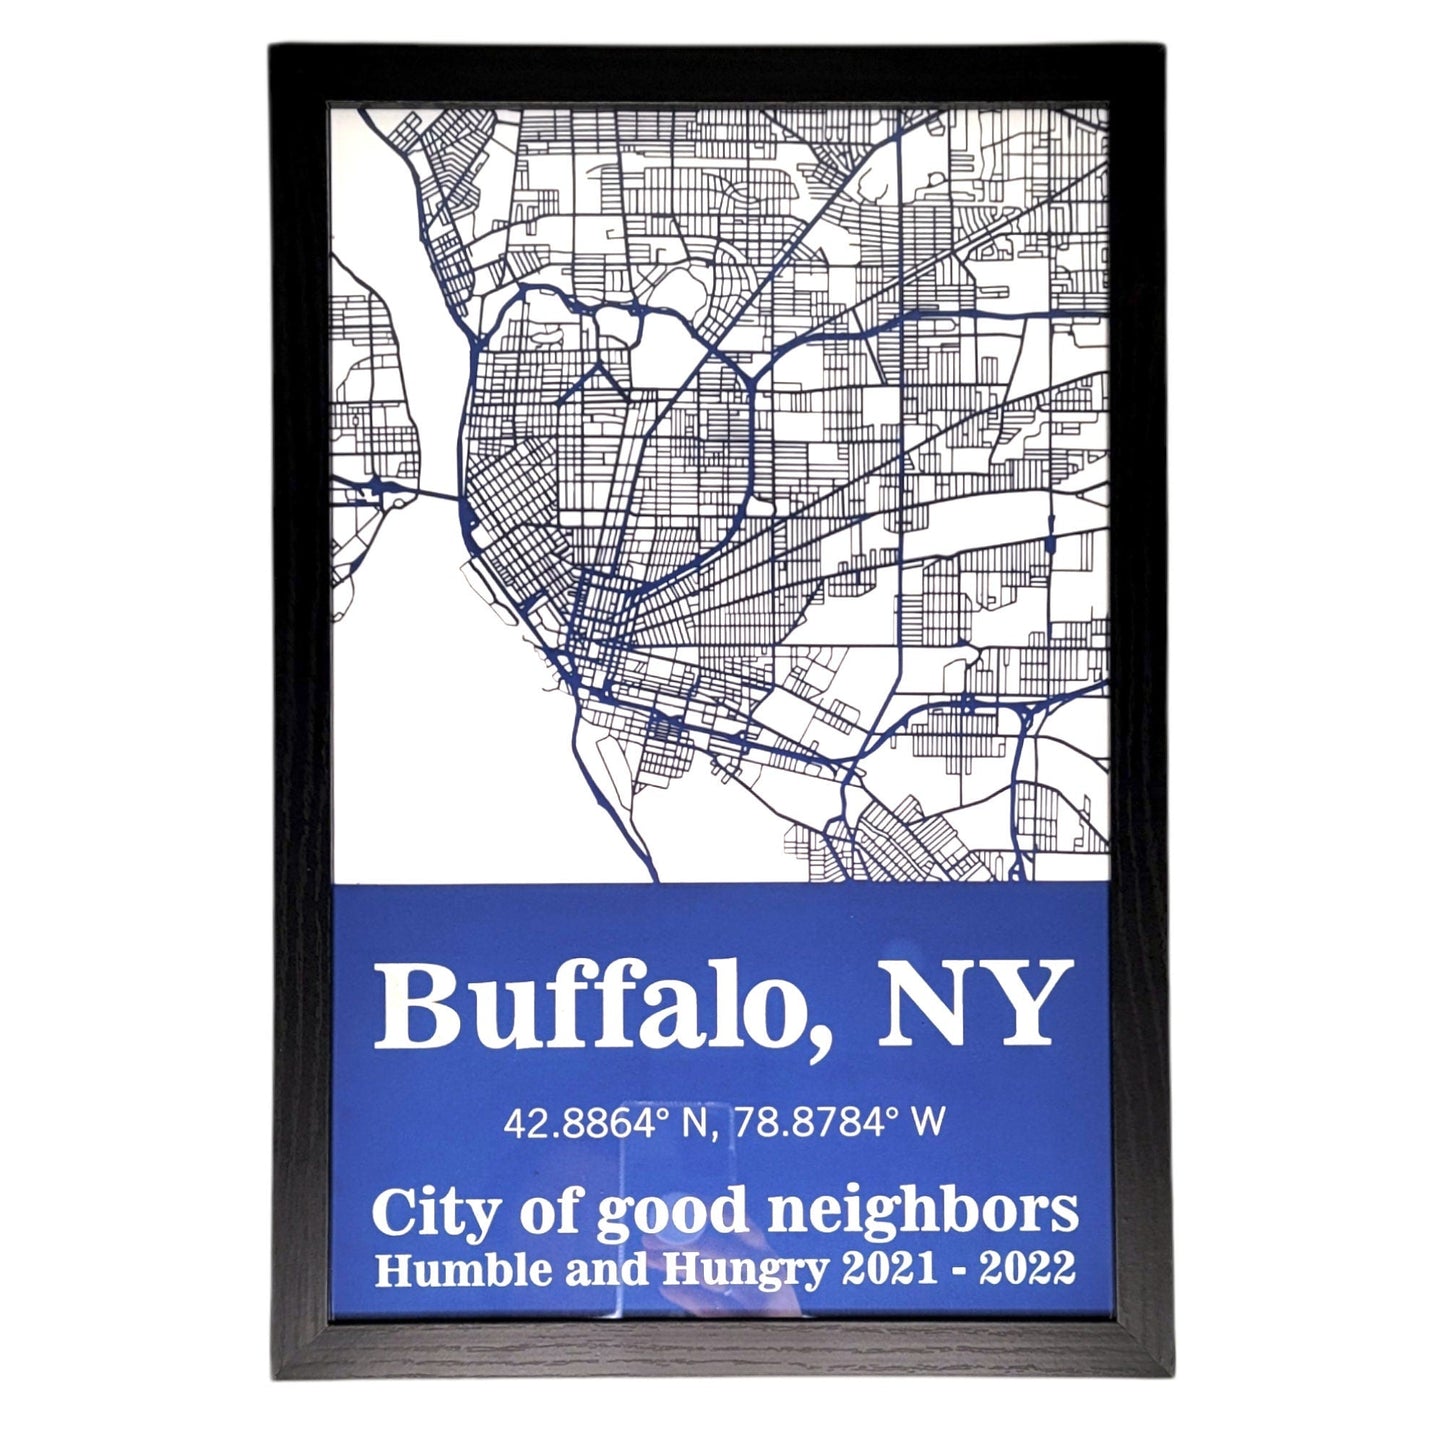 Wall Art Framed Personalized Customizable City Map | Jones Laser Craft Personalized Gift